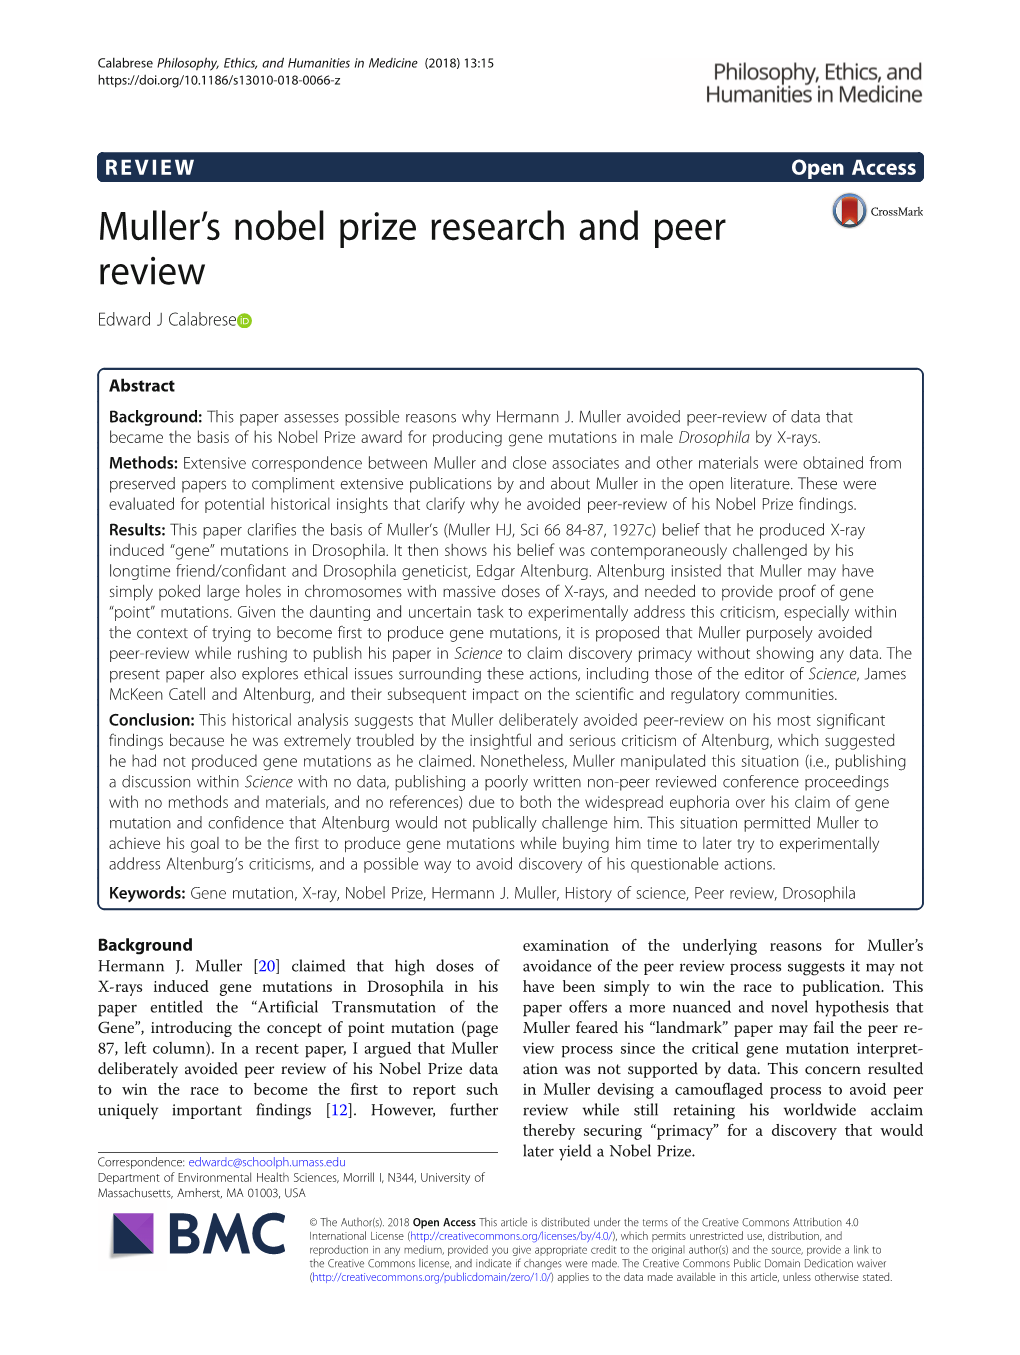 Muller's Nobel Prize Research and Peer Review